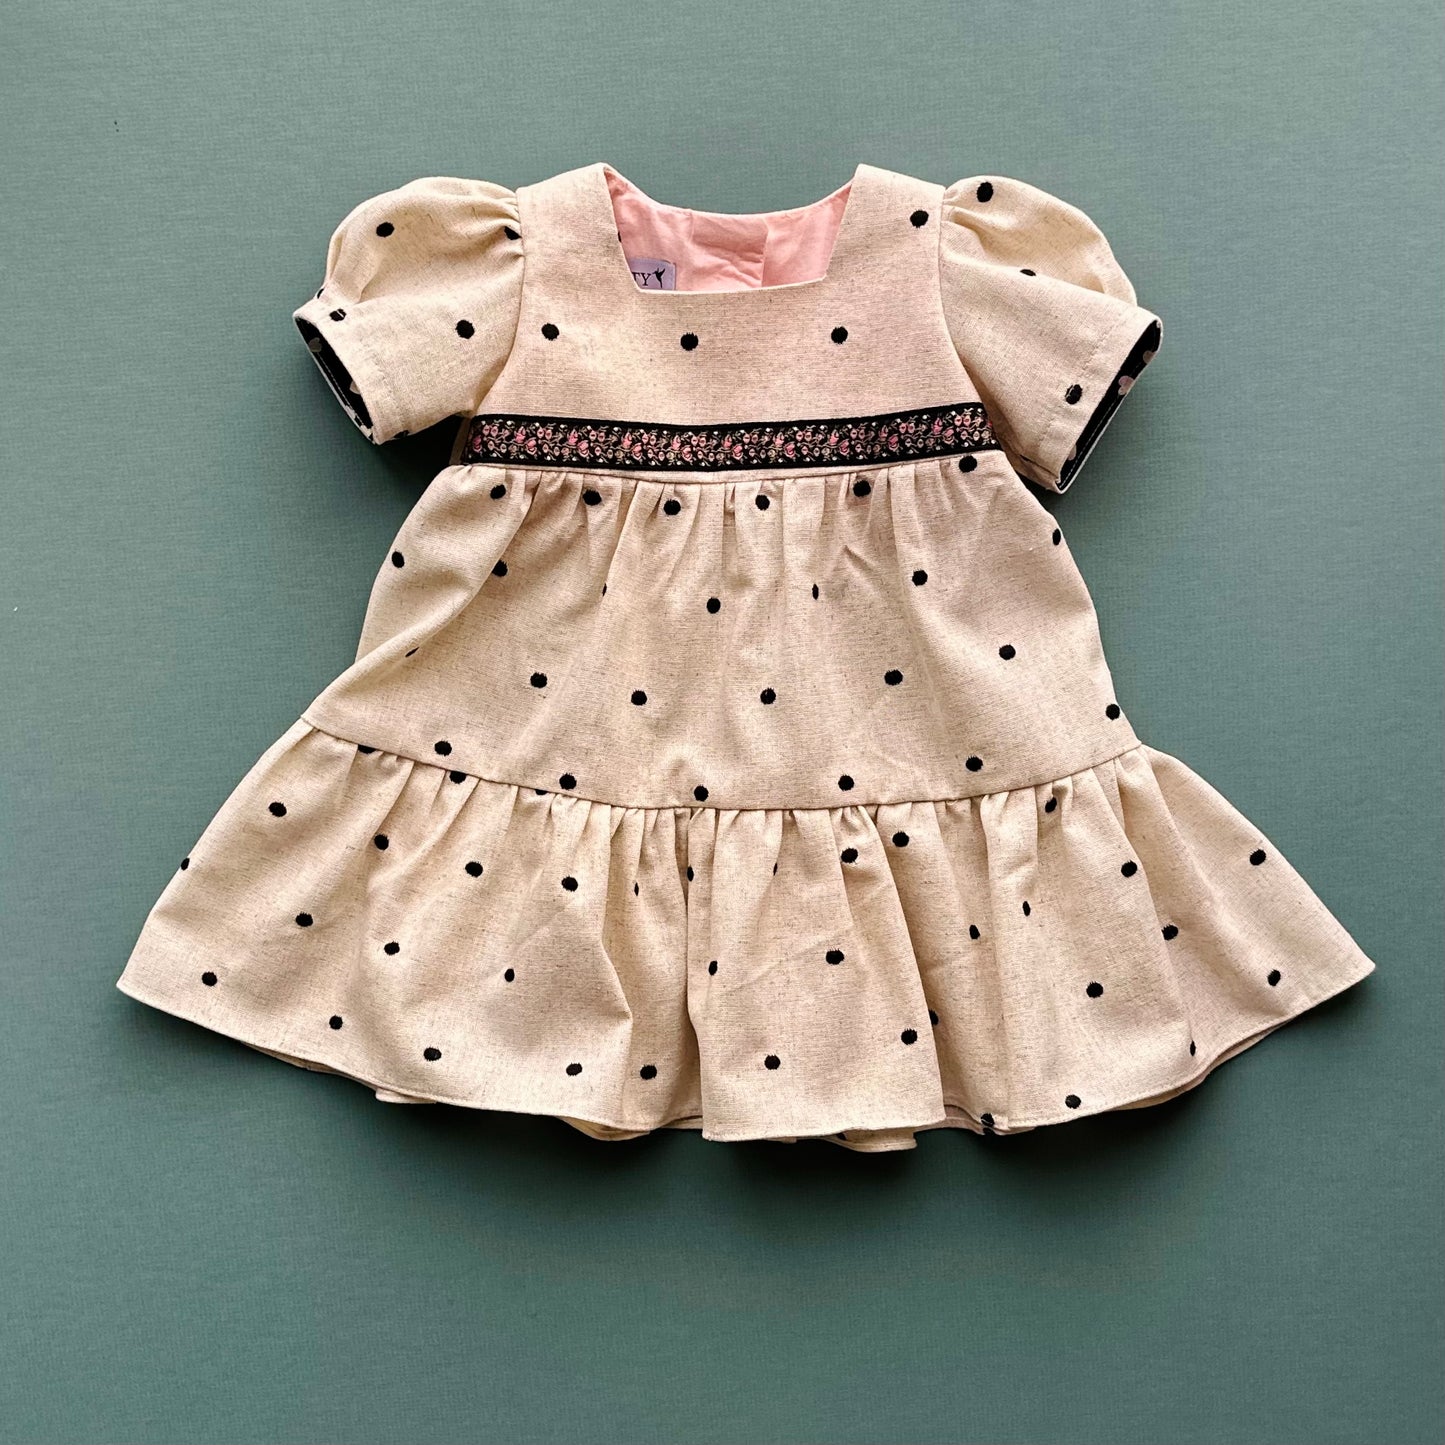 Baby Vintage Inspired Dot Dress Handmade in BC, Canada